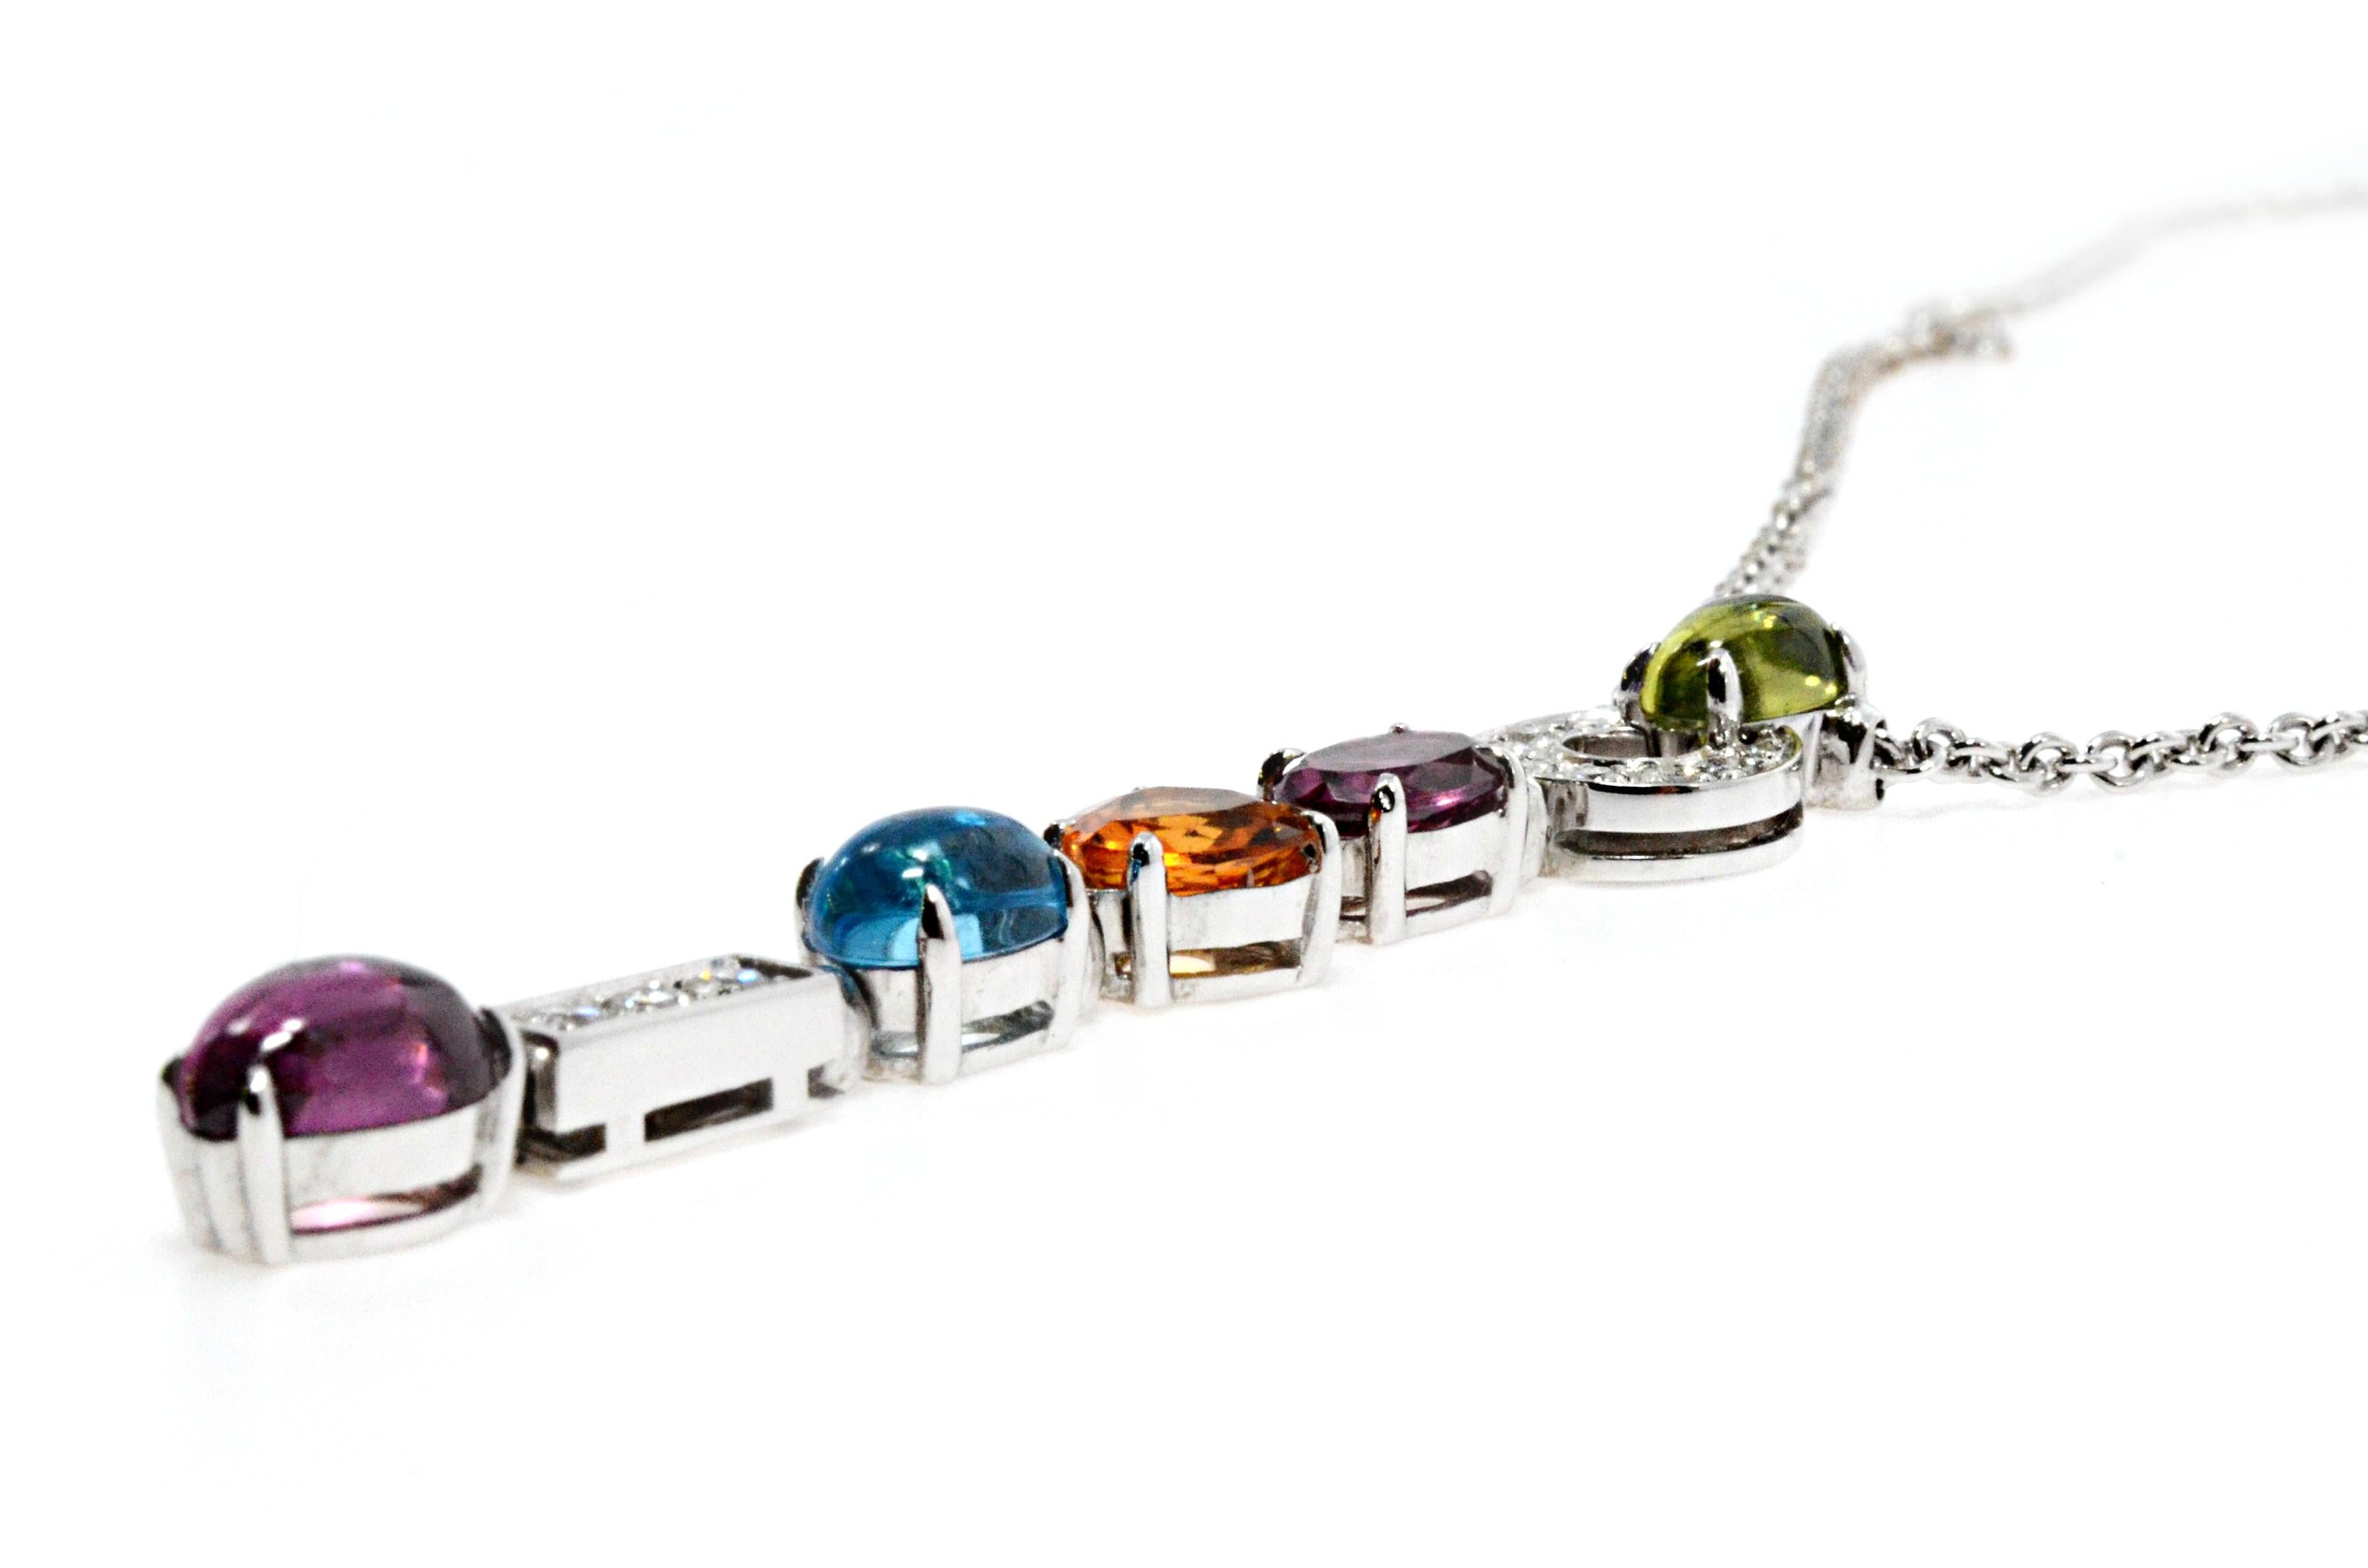 18K white gold Bvlgari Allegra rolo chain necklace with a fixed multistone pendant featuring 0.32 carats of round brilliant diamonds, citrine, peridot, pink and purple tourmaline, and blue topaz, and a lobster clasp closure. 
Length: 17